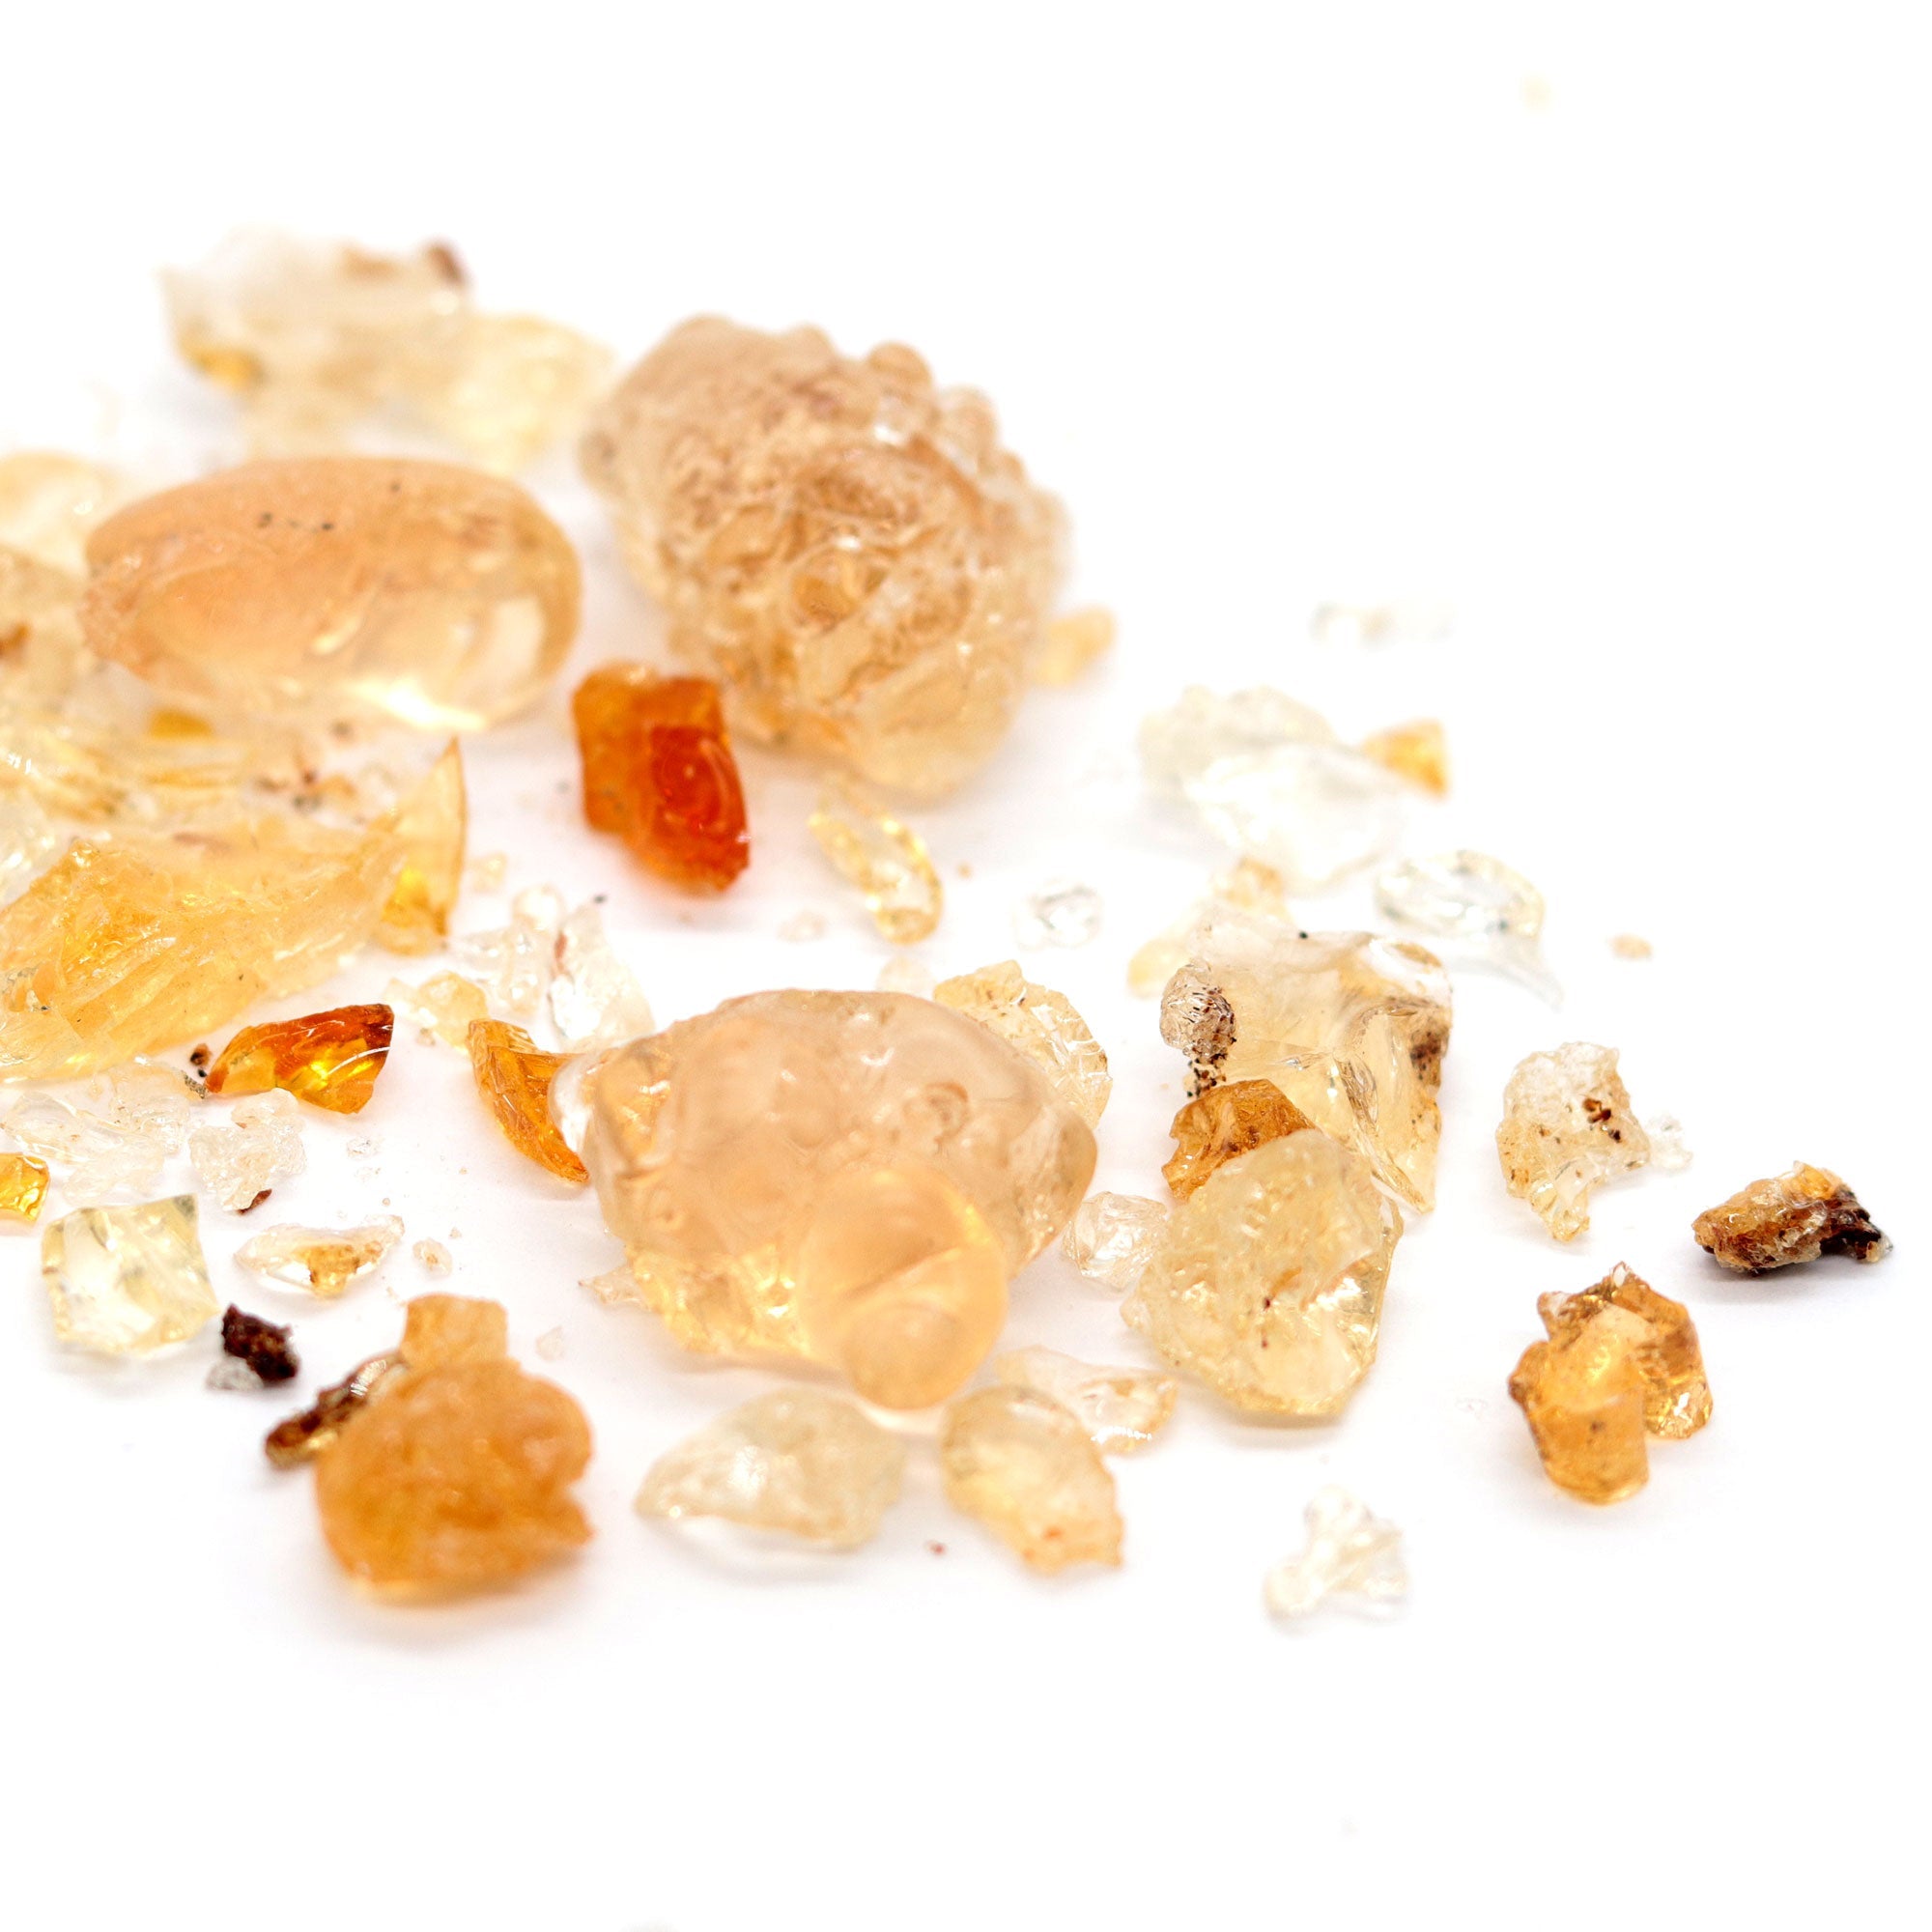 Gum Arabic Resin for Purification and Blessing